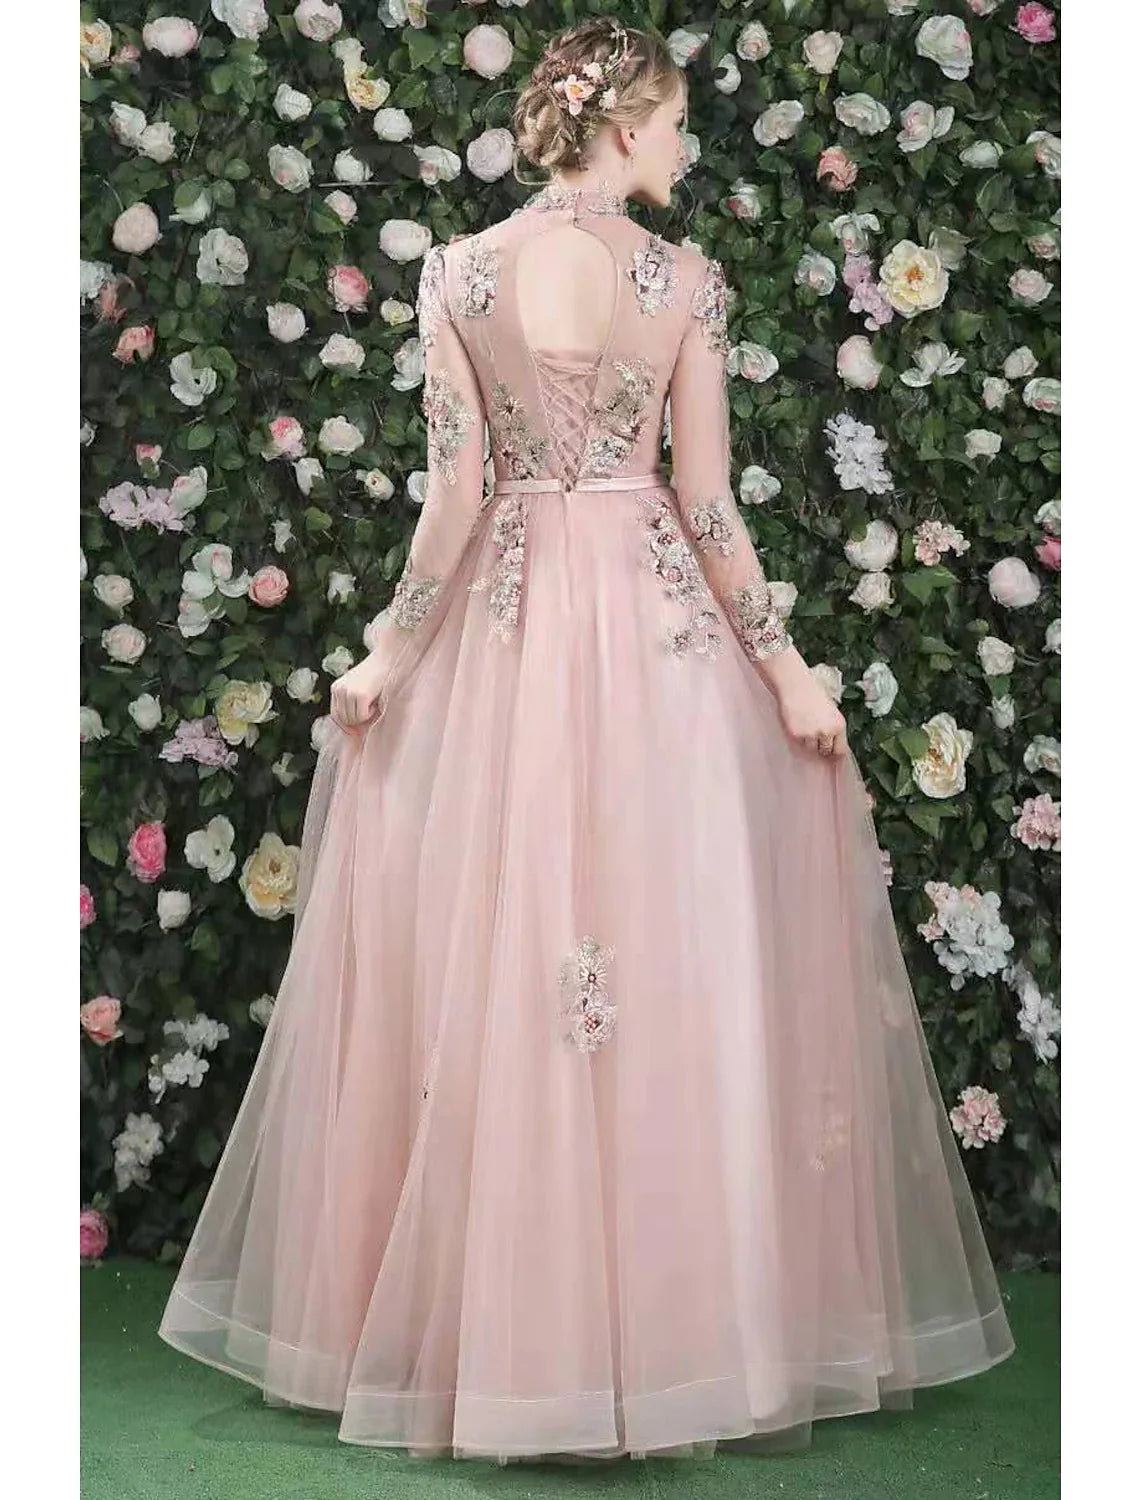 A-Line Cut Out Floral Prom Formal Evening Dress High Neck Long Sleeve Floor Length with Embroidery